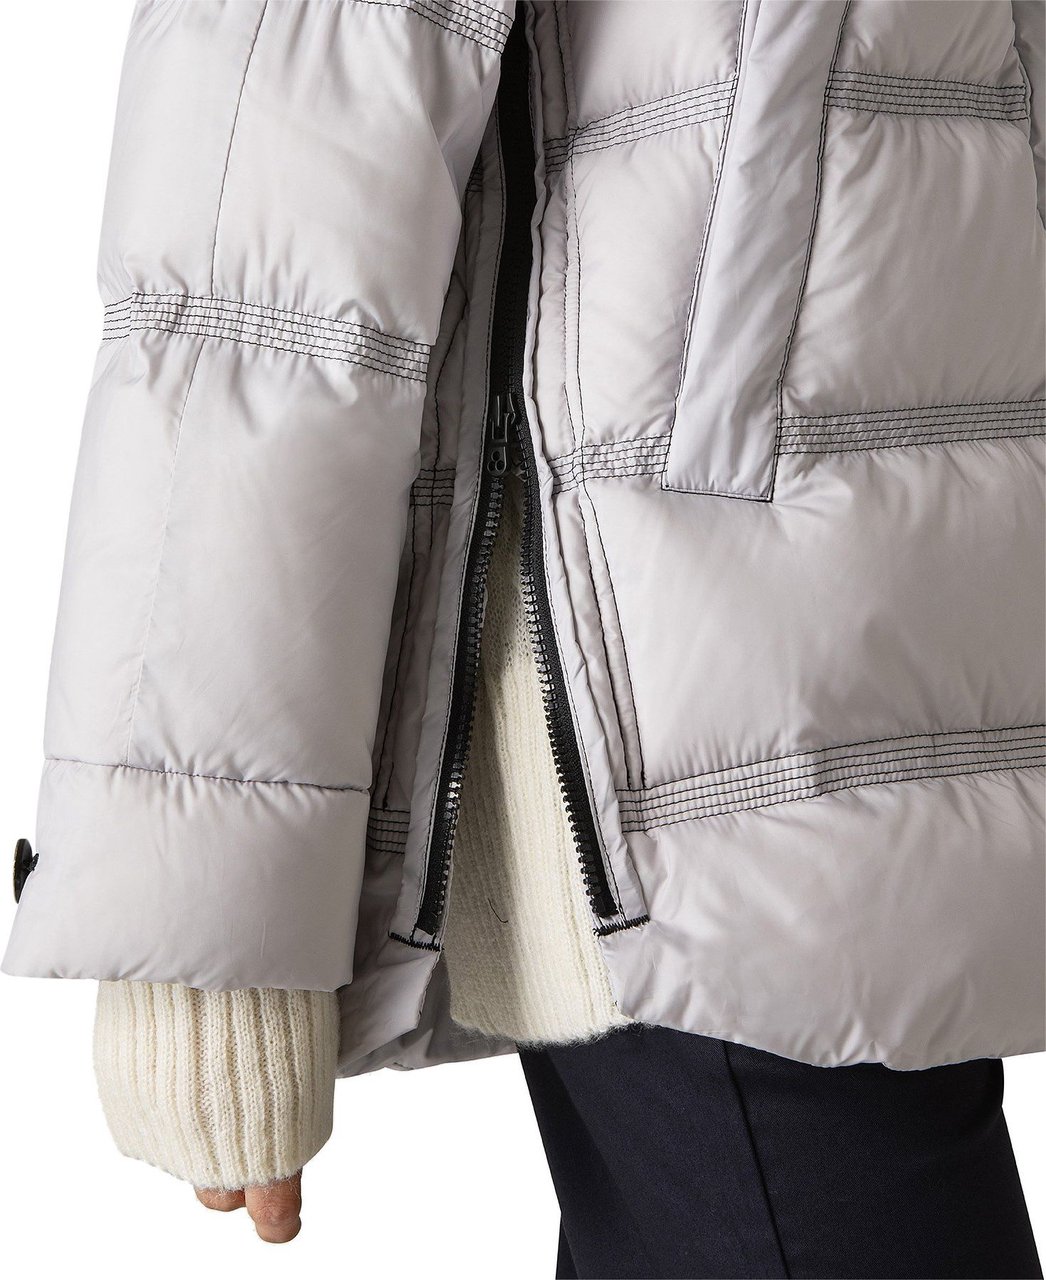 Peuterey Fashion and functional superlight down jacket Grijs